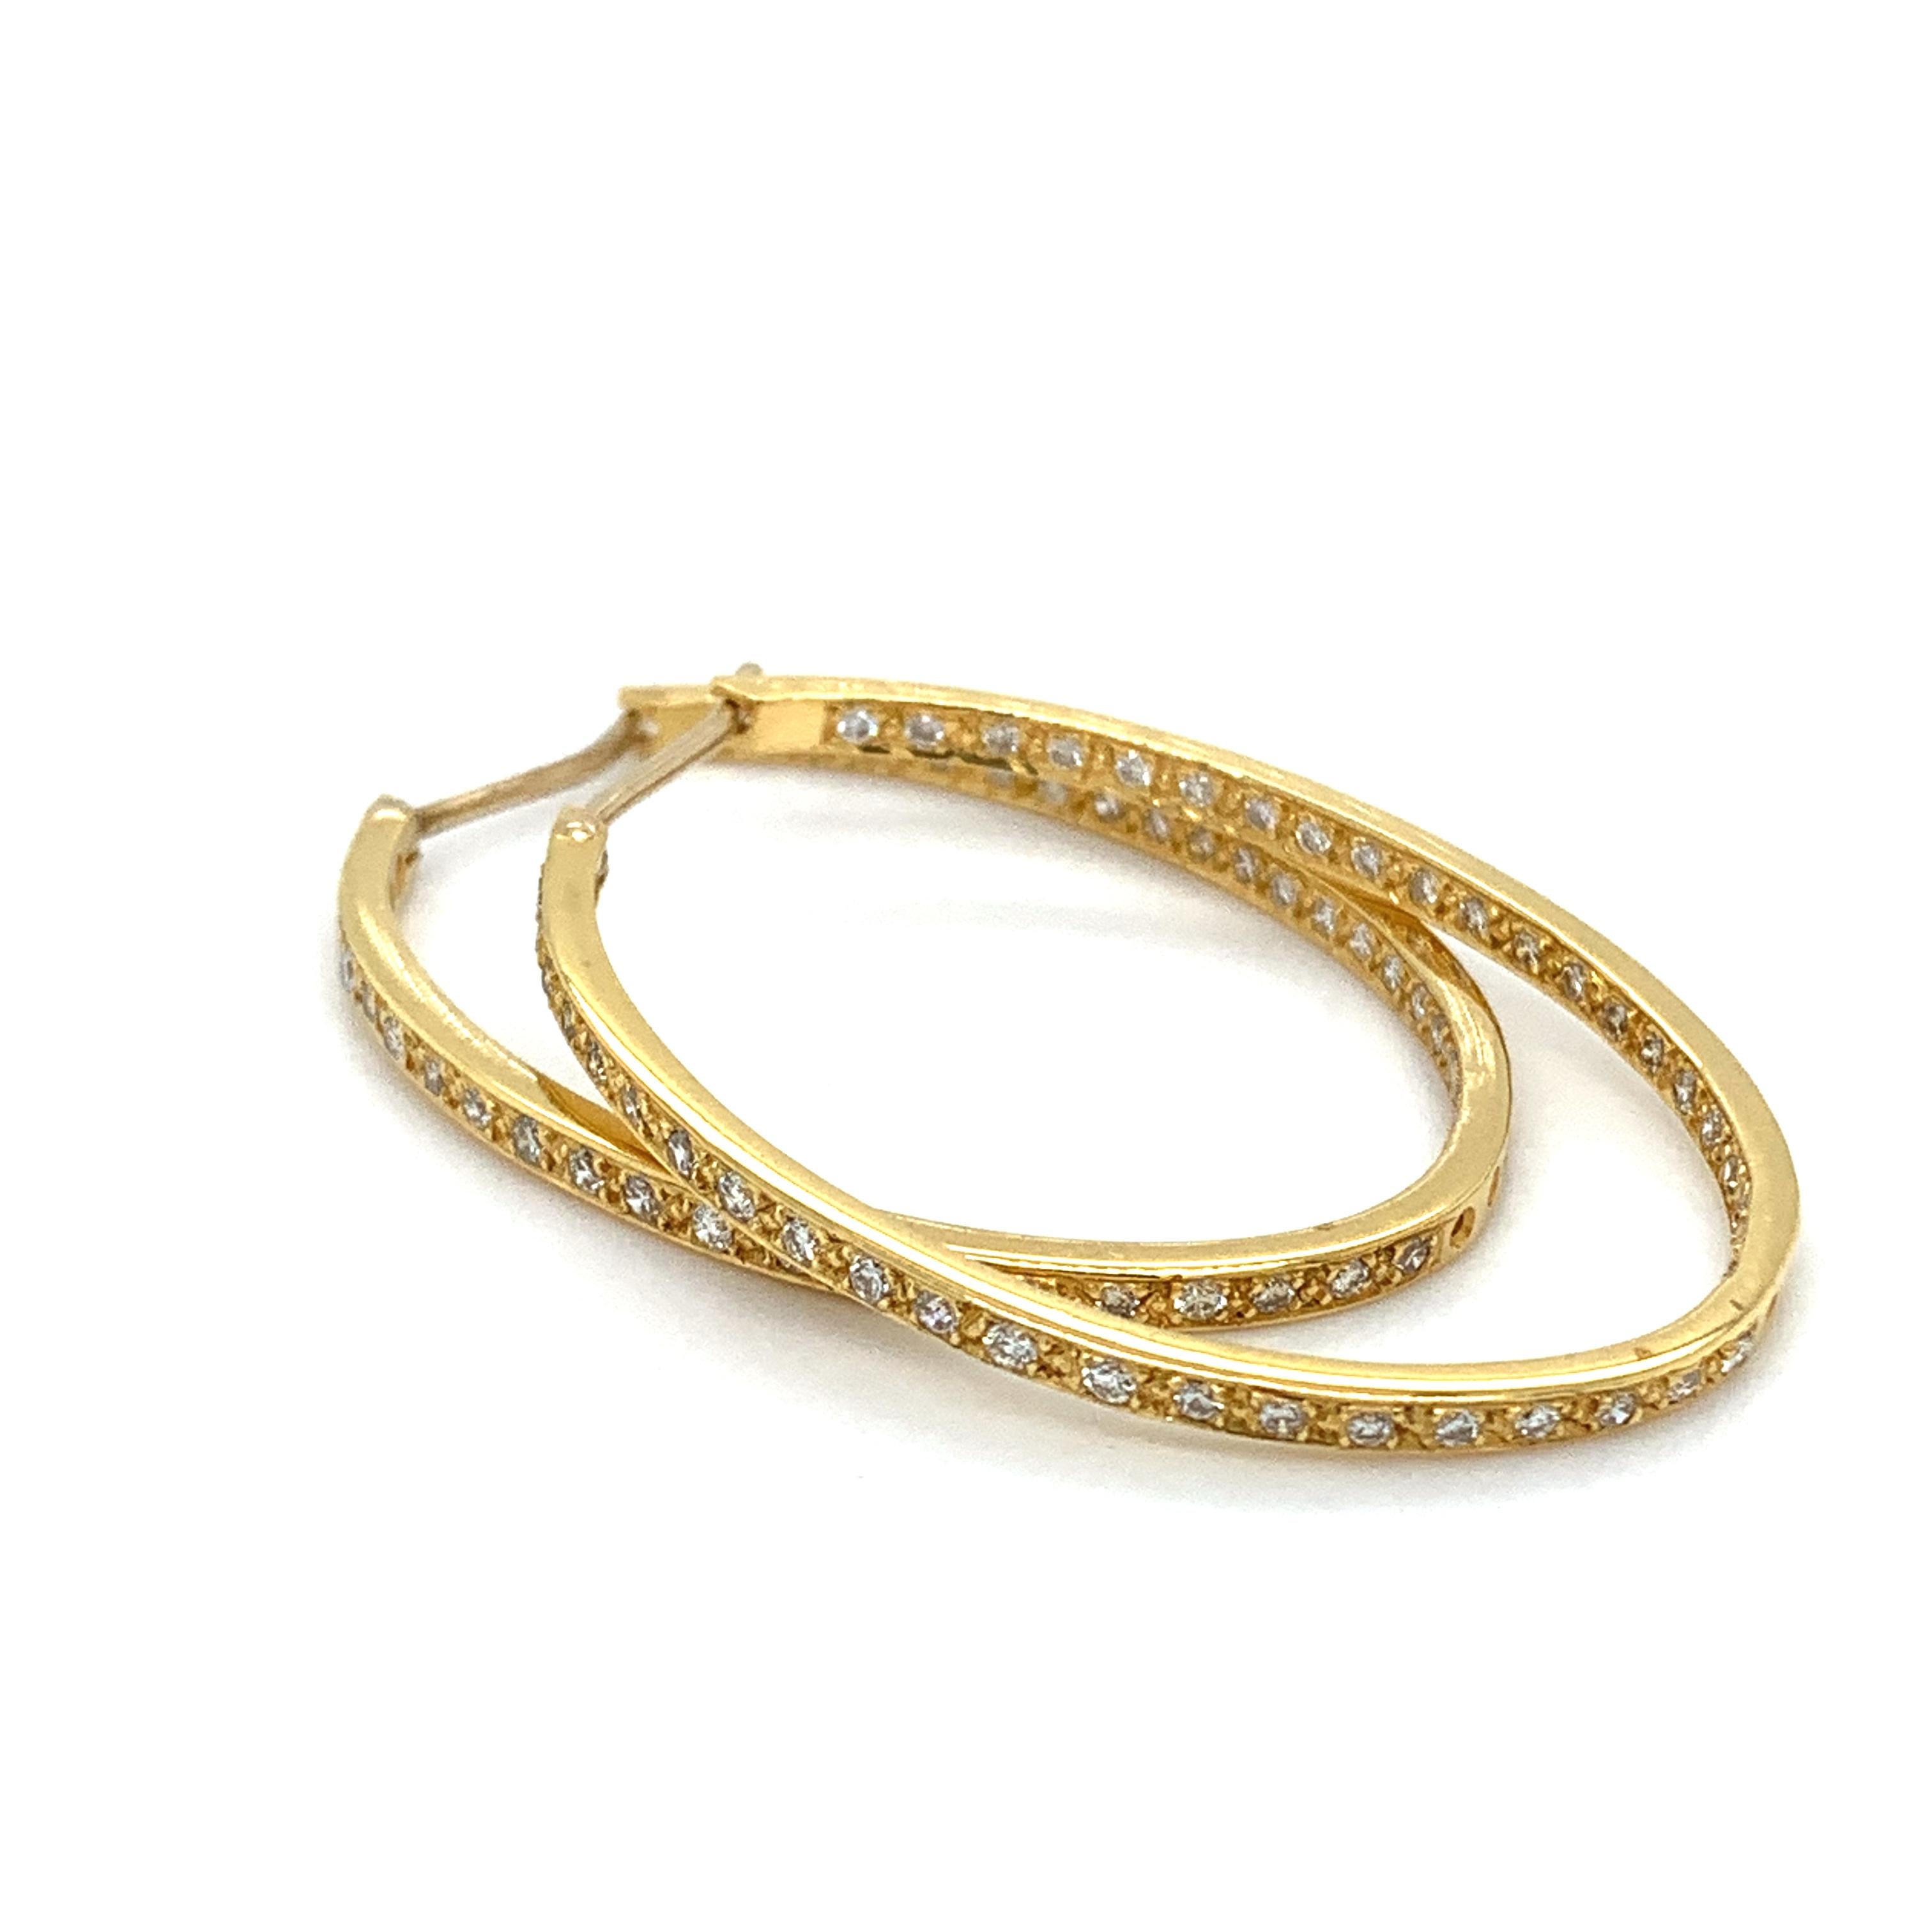 Diamond double side large hoop earrings 18k yellow gold
Round brilliant diamond cut total weight 1.68ct F colour VS1 clarity double side diamond hoop earrings in 18k yellow gold
Width of the hoop earrings approximately 2mm
Diameter of the hoops